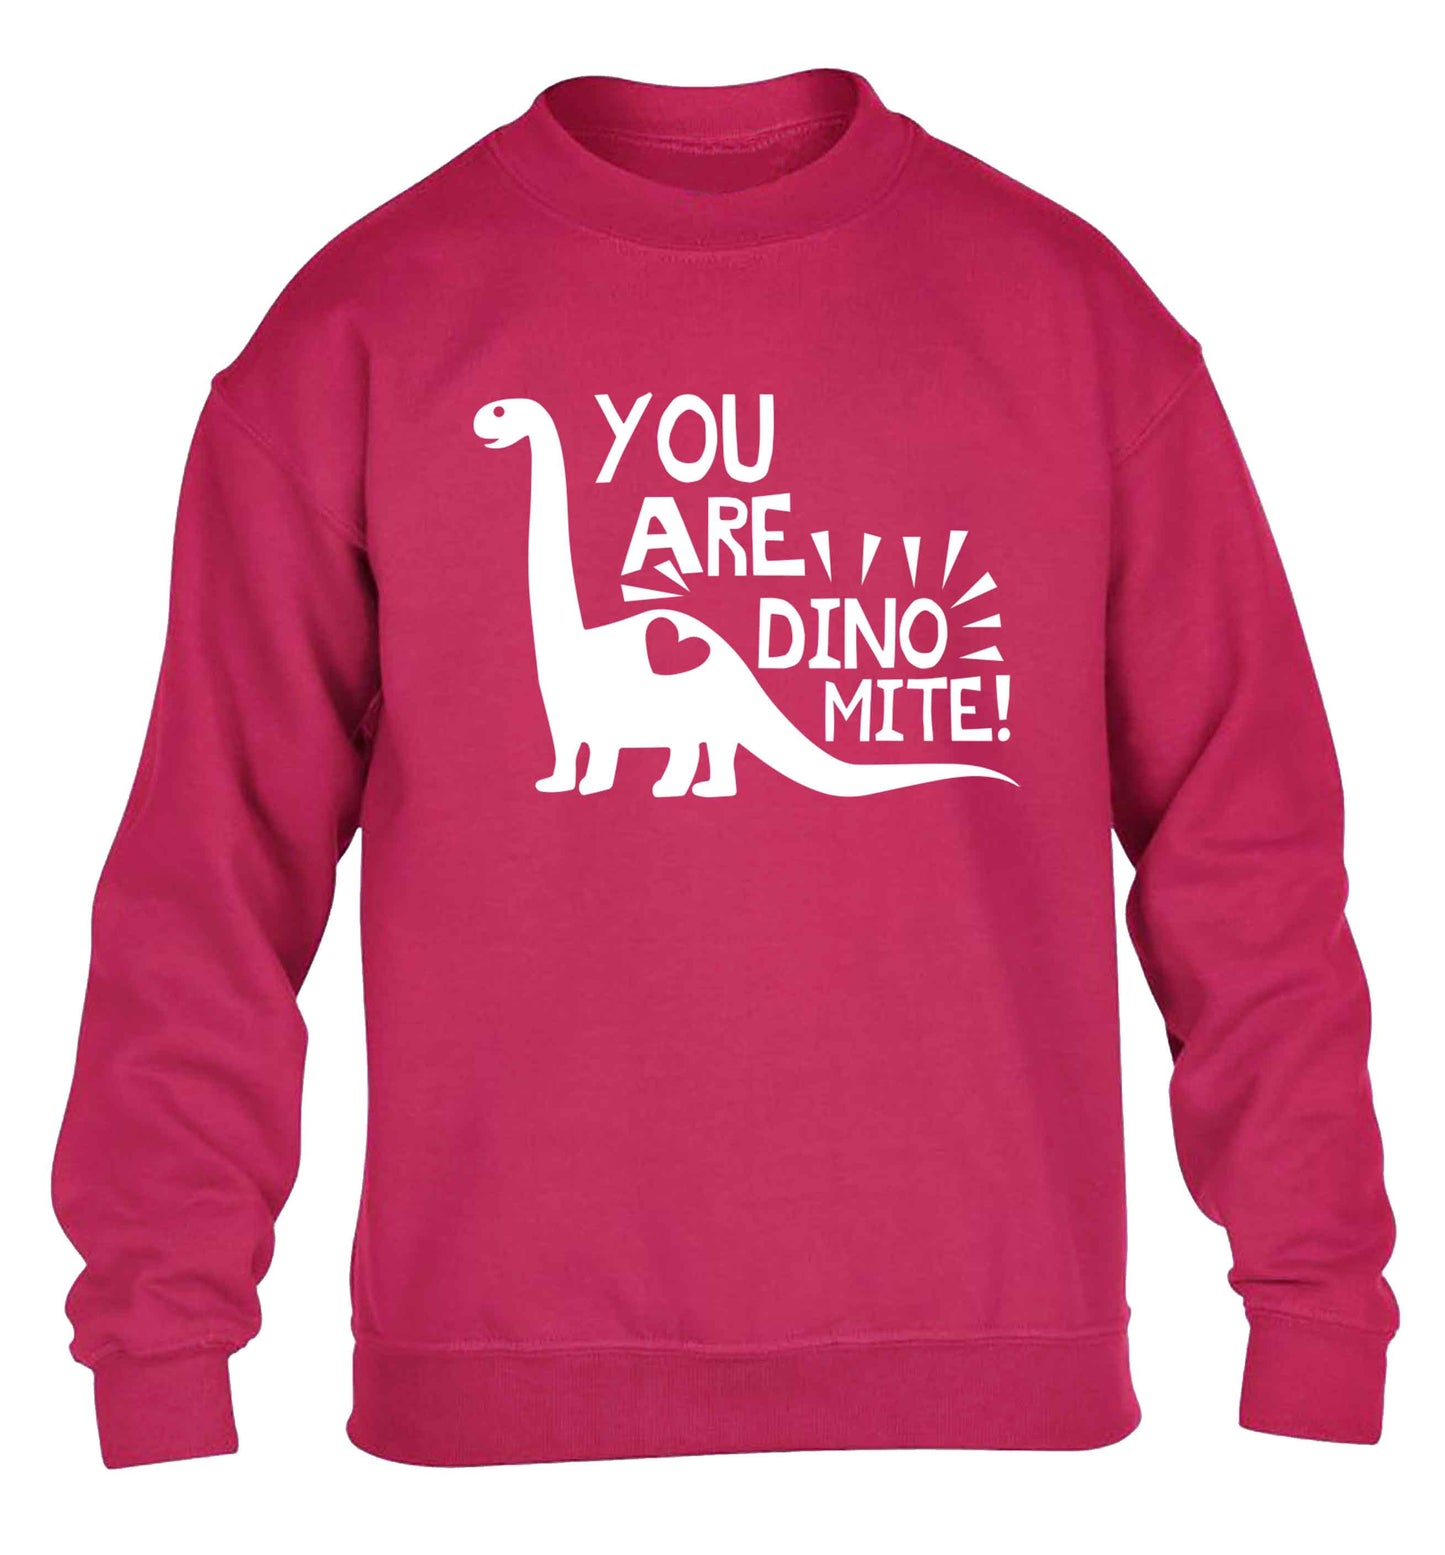 You are dinomite! children's pink sweater 12-13 Years